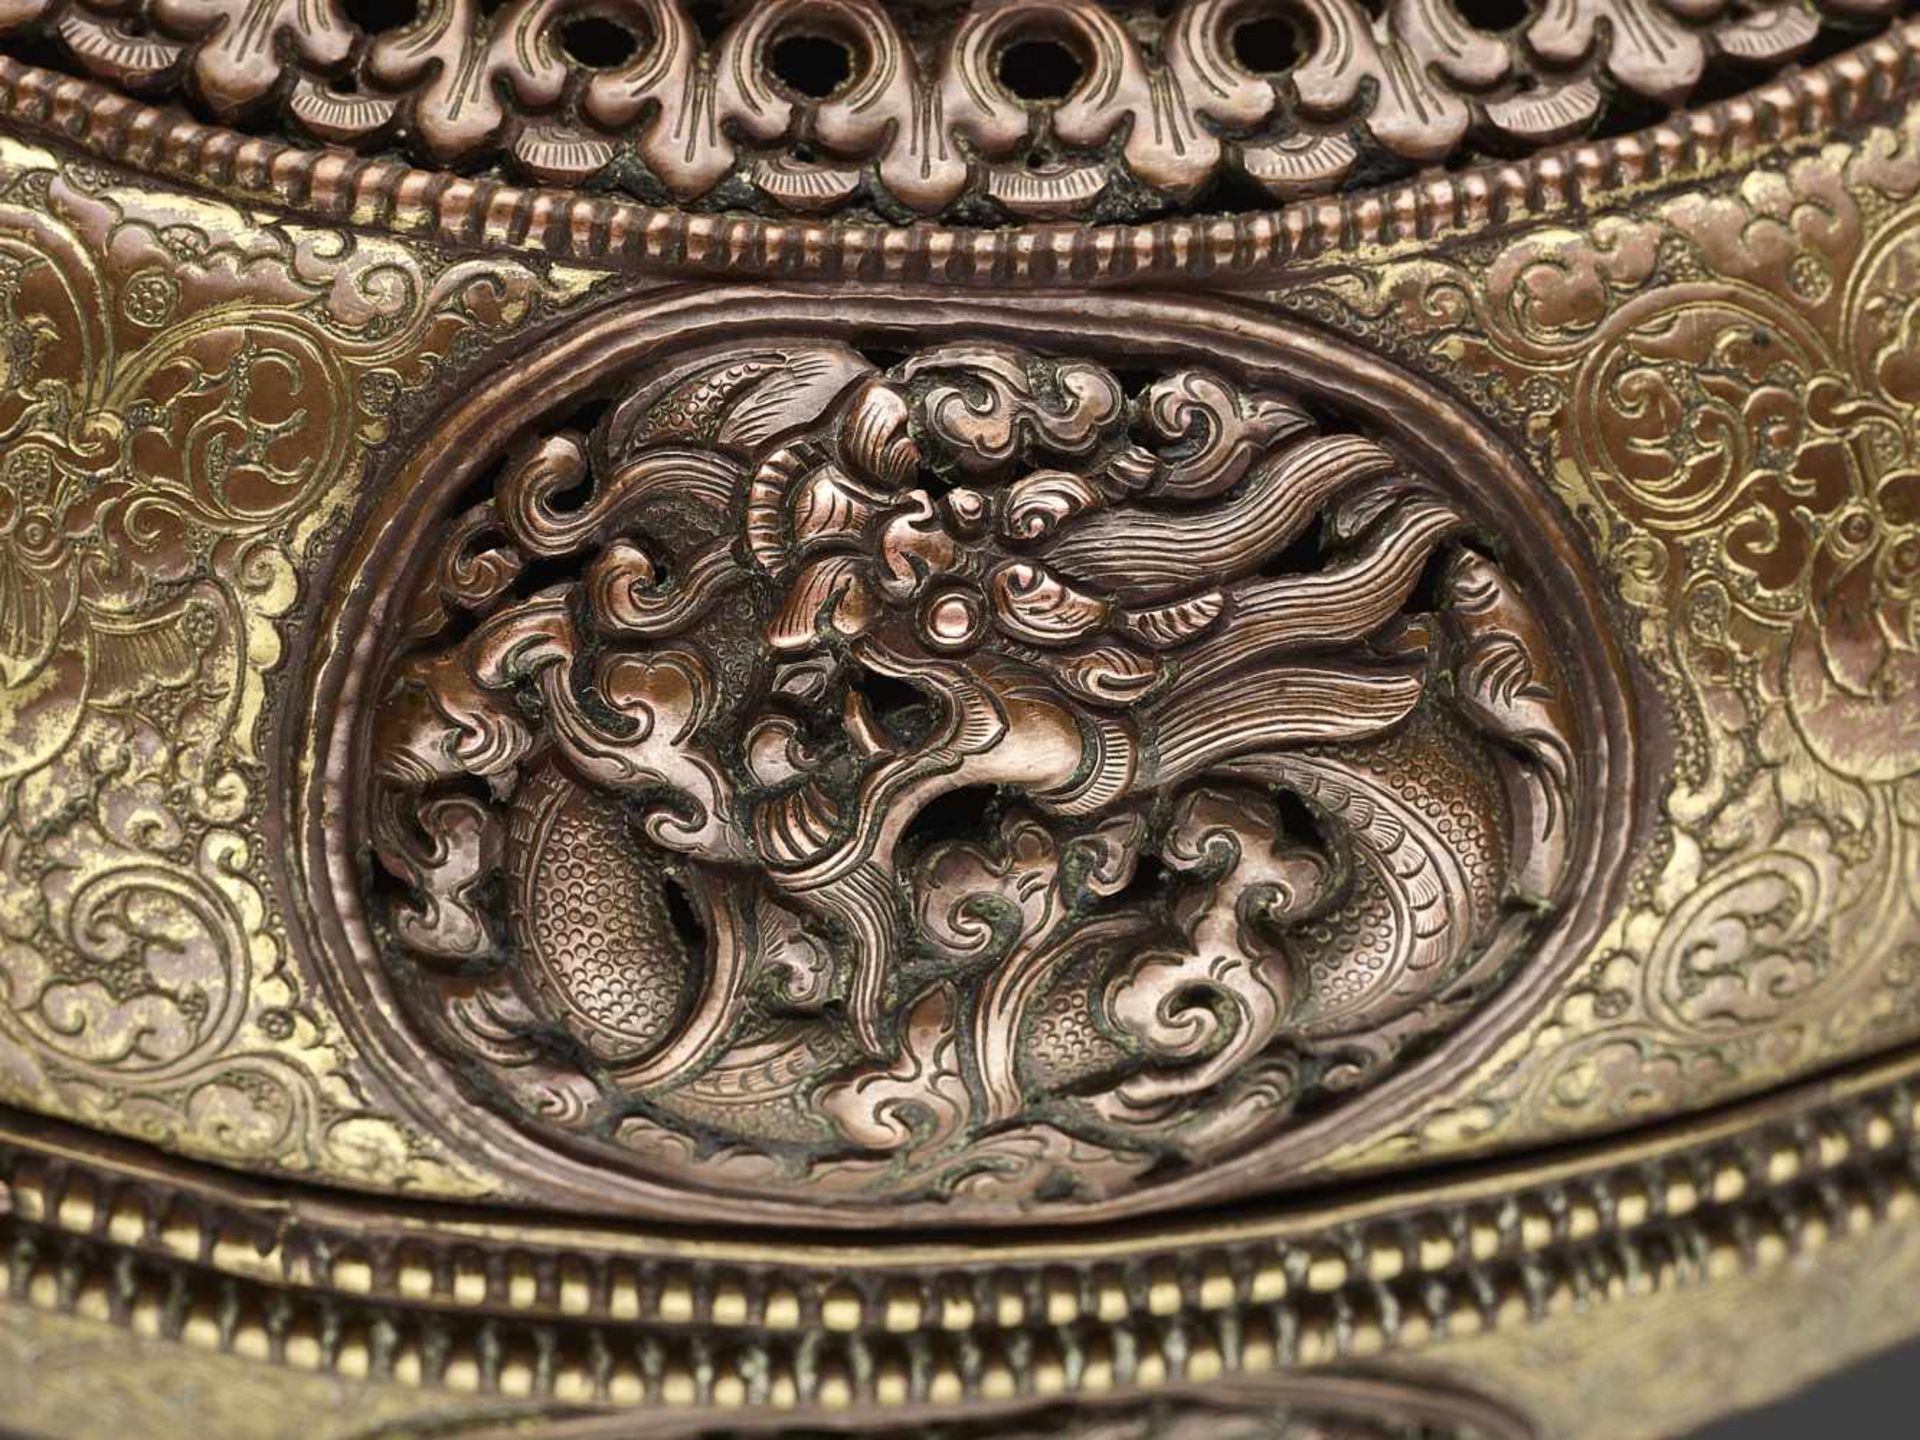 A GILT COPPER REPOUSSÉ RICE CONTAINER Tibet, 17th – 18th century. Finely engraved, embossed and - Image 4 of 9